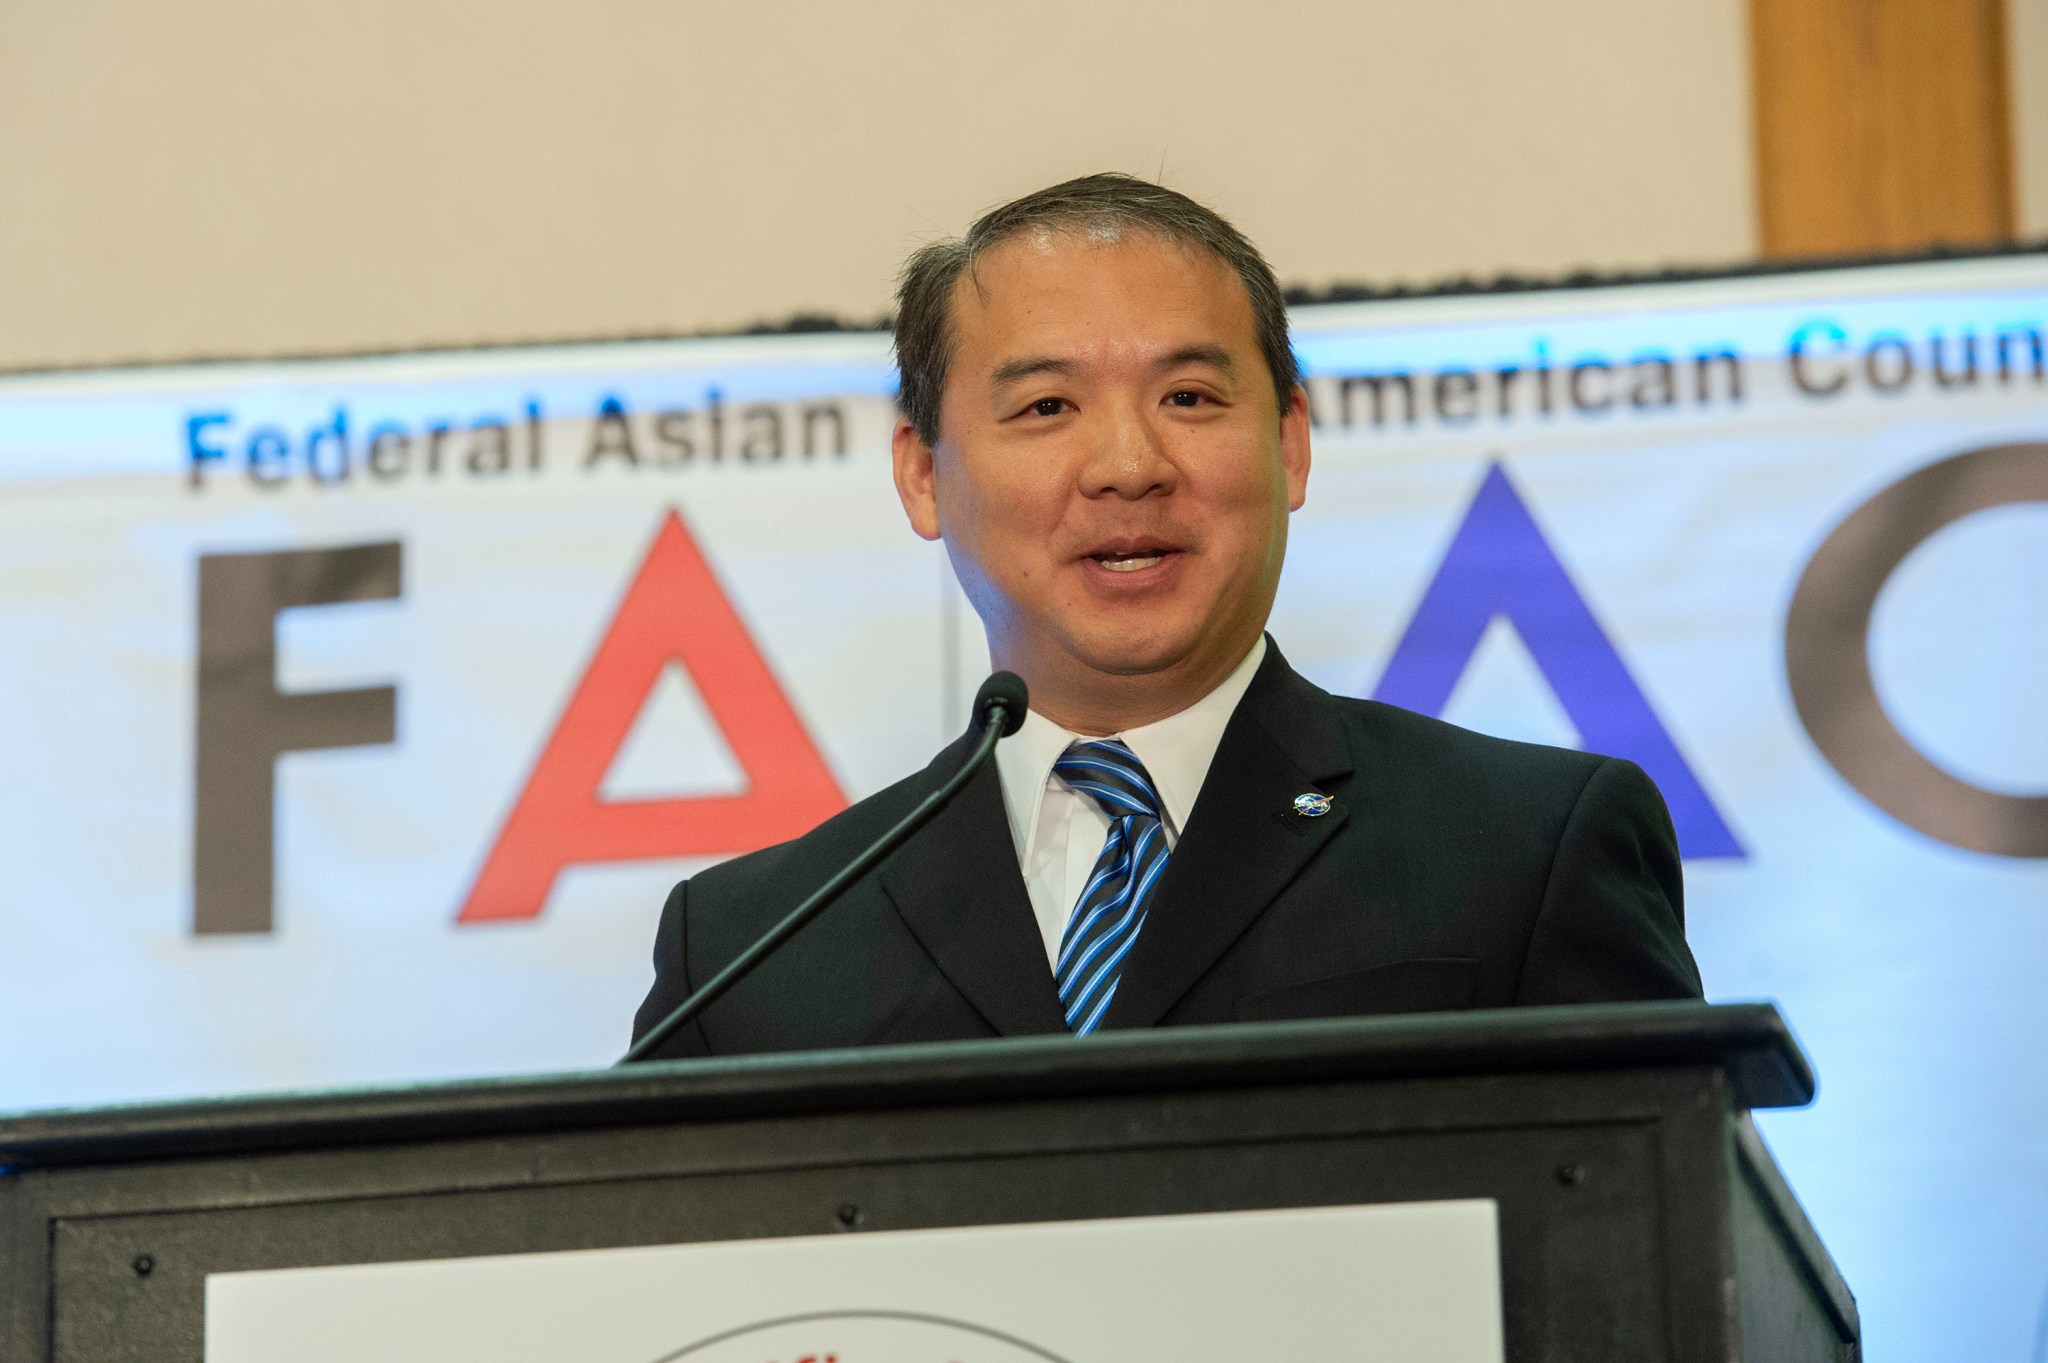 Steve Shih speaks at the opening of the 2019 Federal Asian Pacific American Council’s National Leadership Training Program.